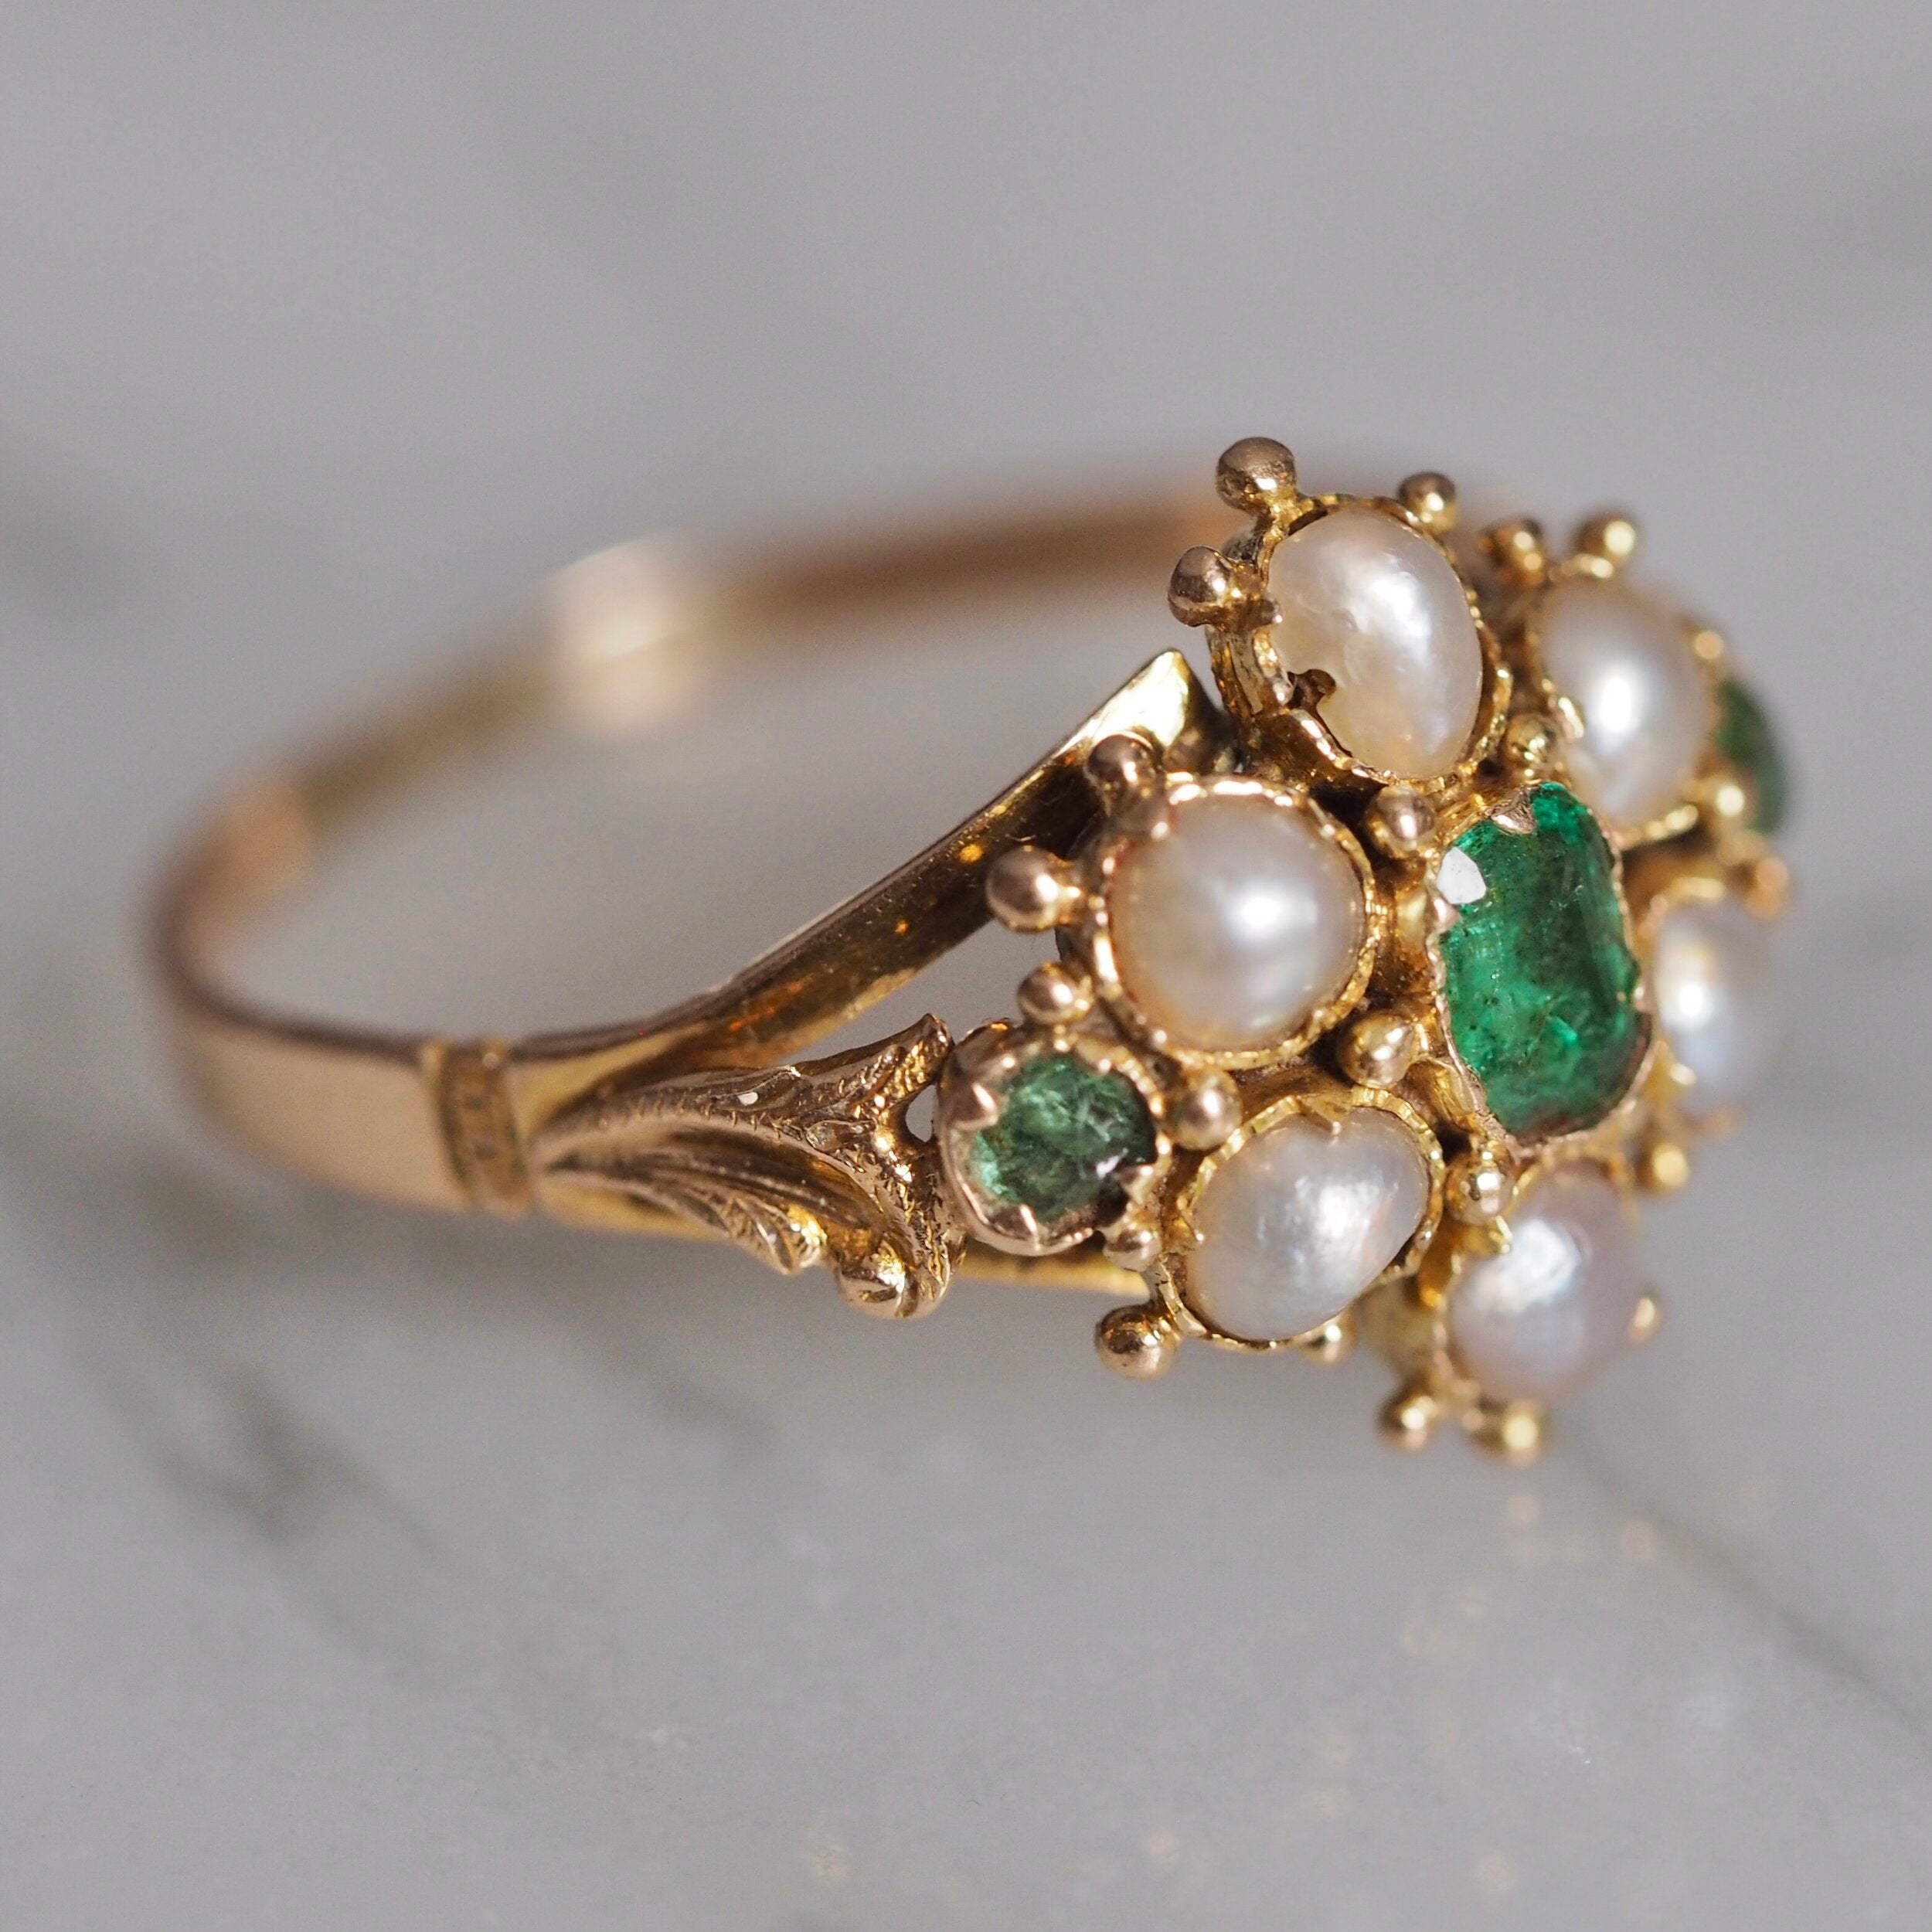 Antique Georgian c. 1820-1830 15k Gold Emerald and Natural Pearl Ring